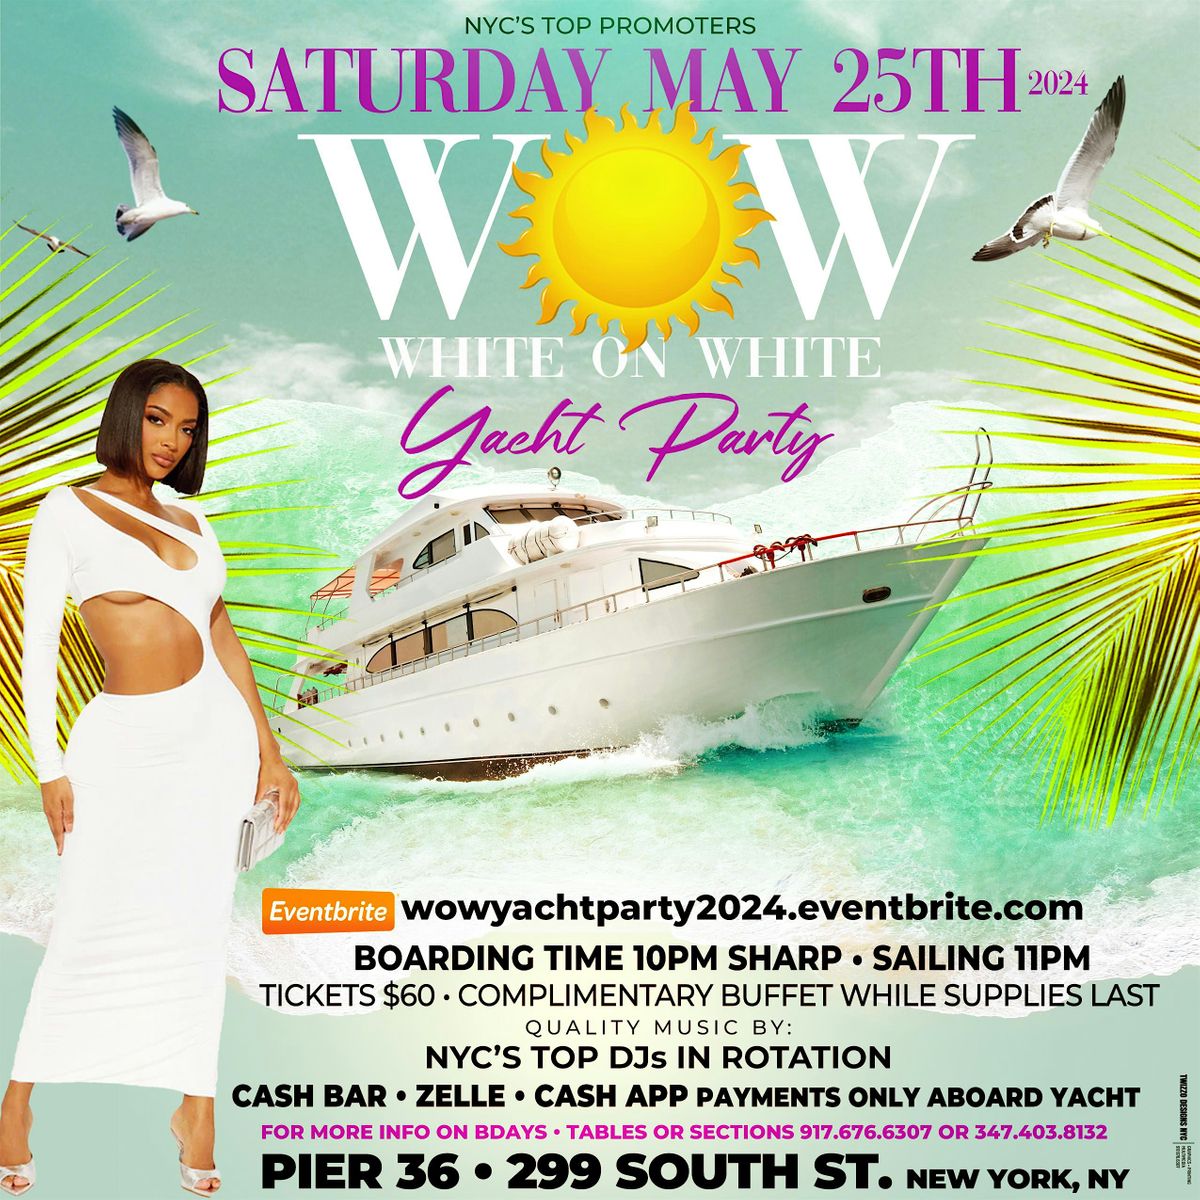 MEMORIAL WEEKEND  \u2022 WHITE ON WHITE YACHT PARTY \u2022 COMPLIMENTARY BUFFET